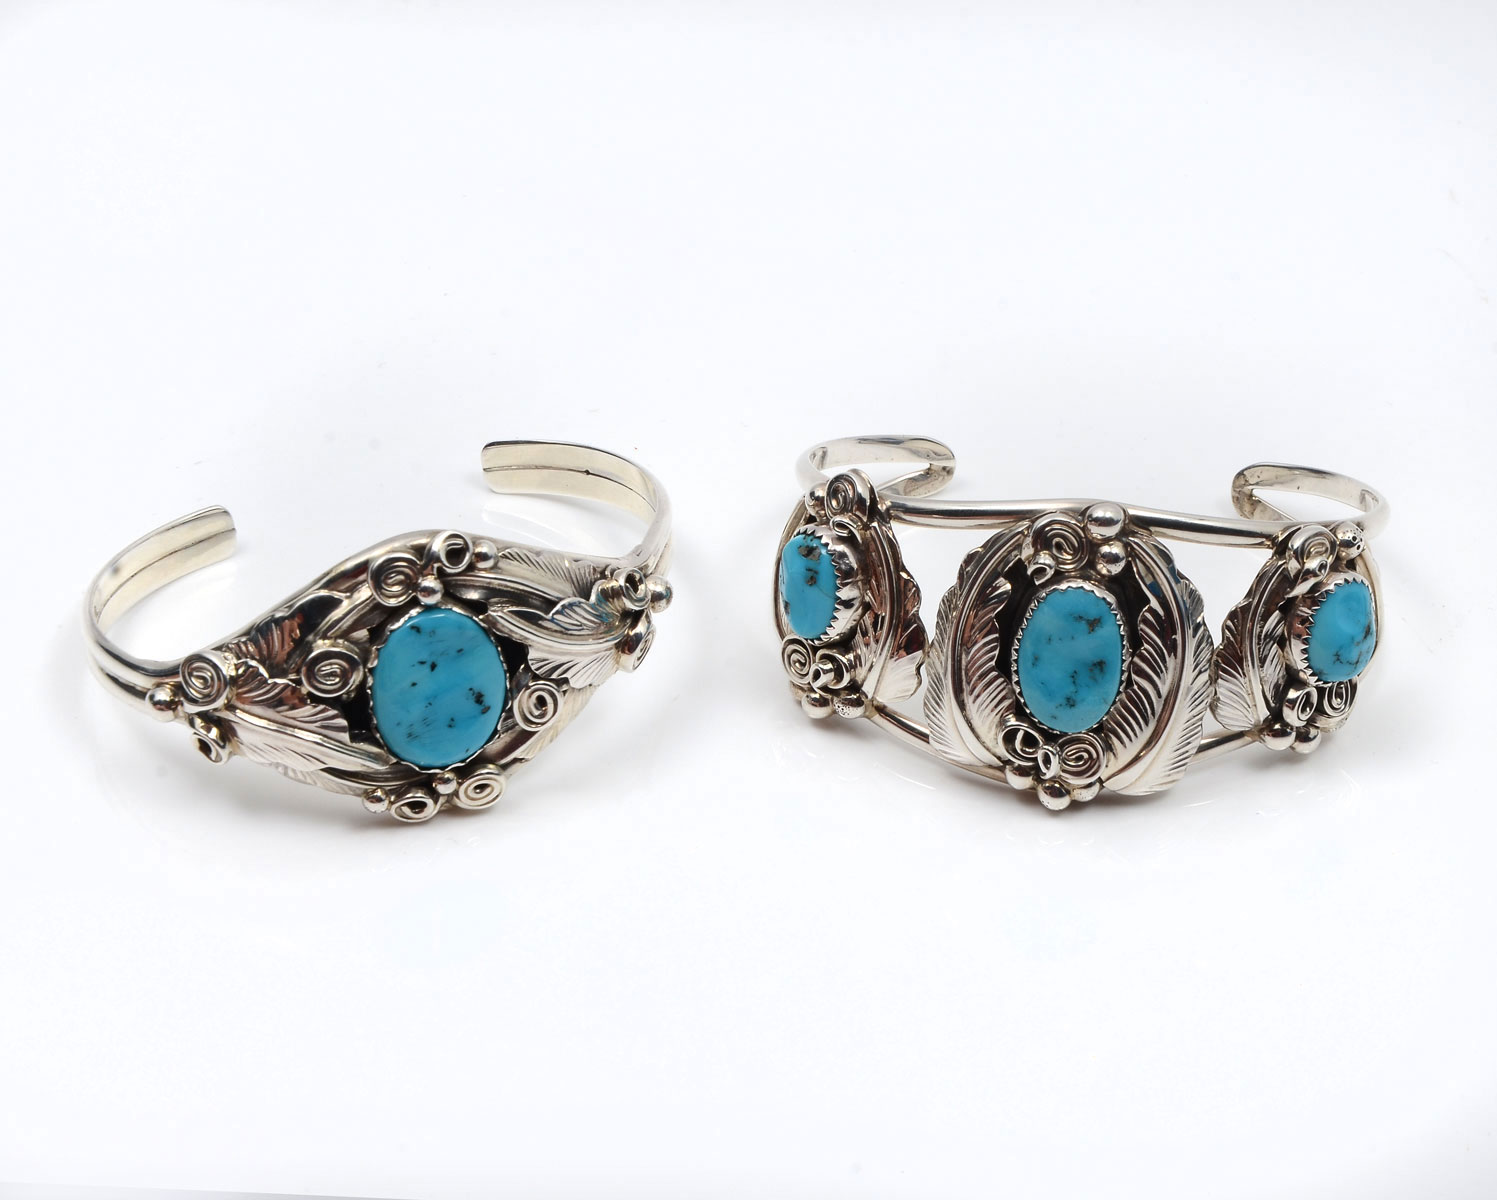 2 NAVAJO STERLING & TURQUOISE CUFF